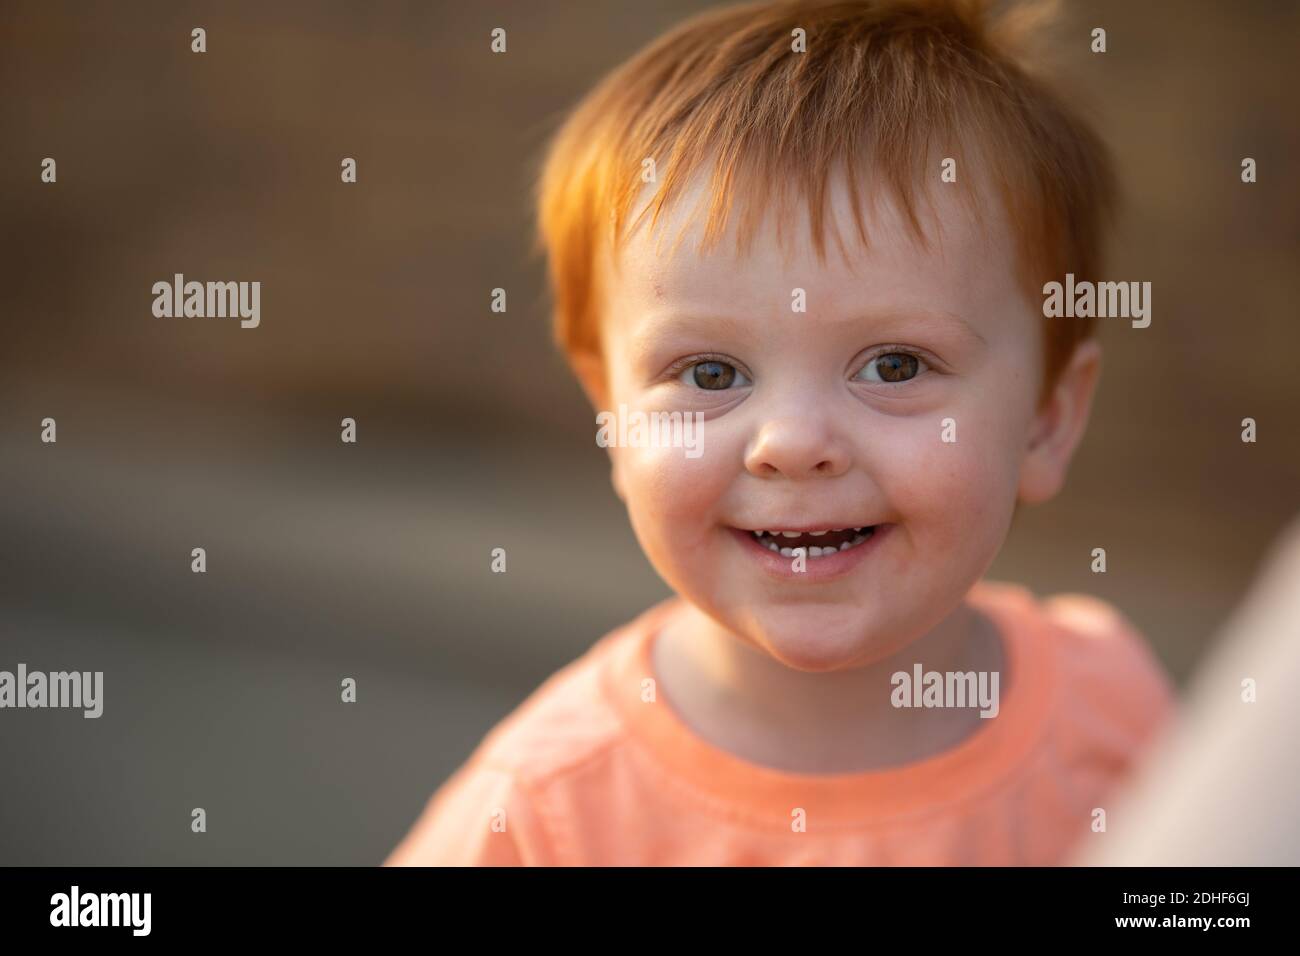 An adorable red haired little boy in an orange shirt (my son) smiles at the camera during some warm late afternoon light. Stock Photo